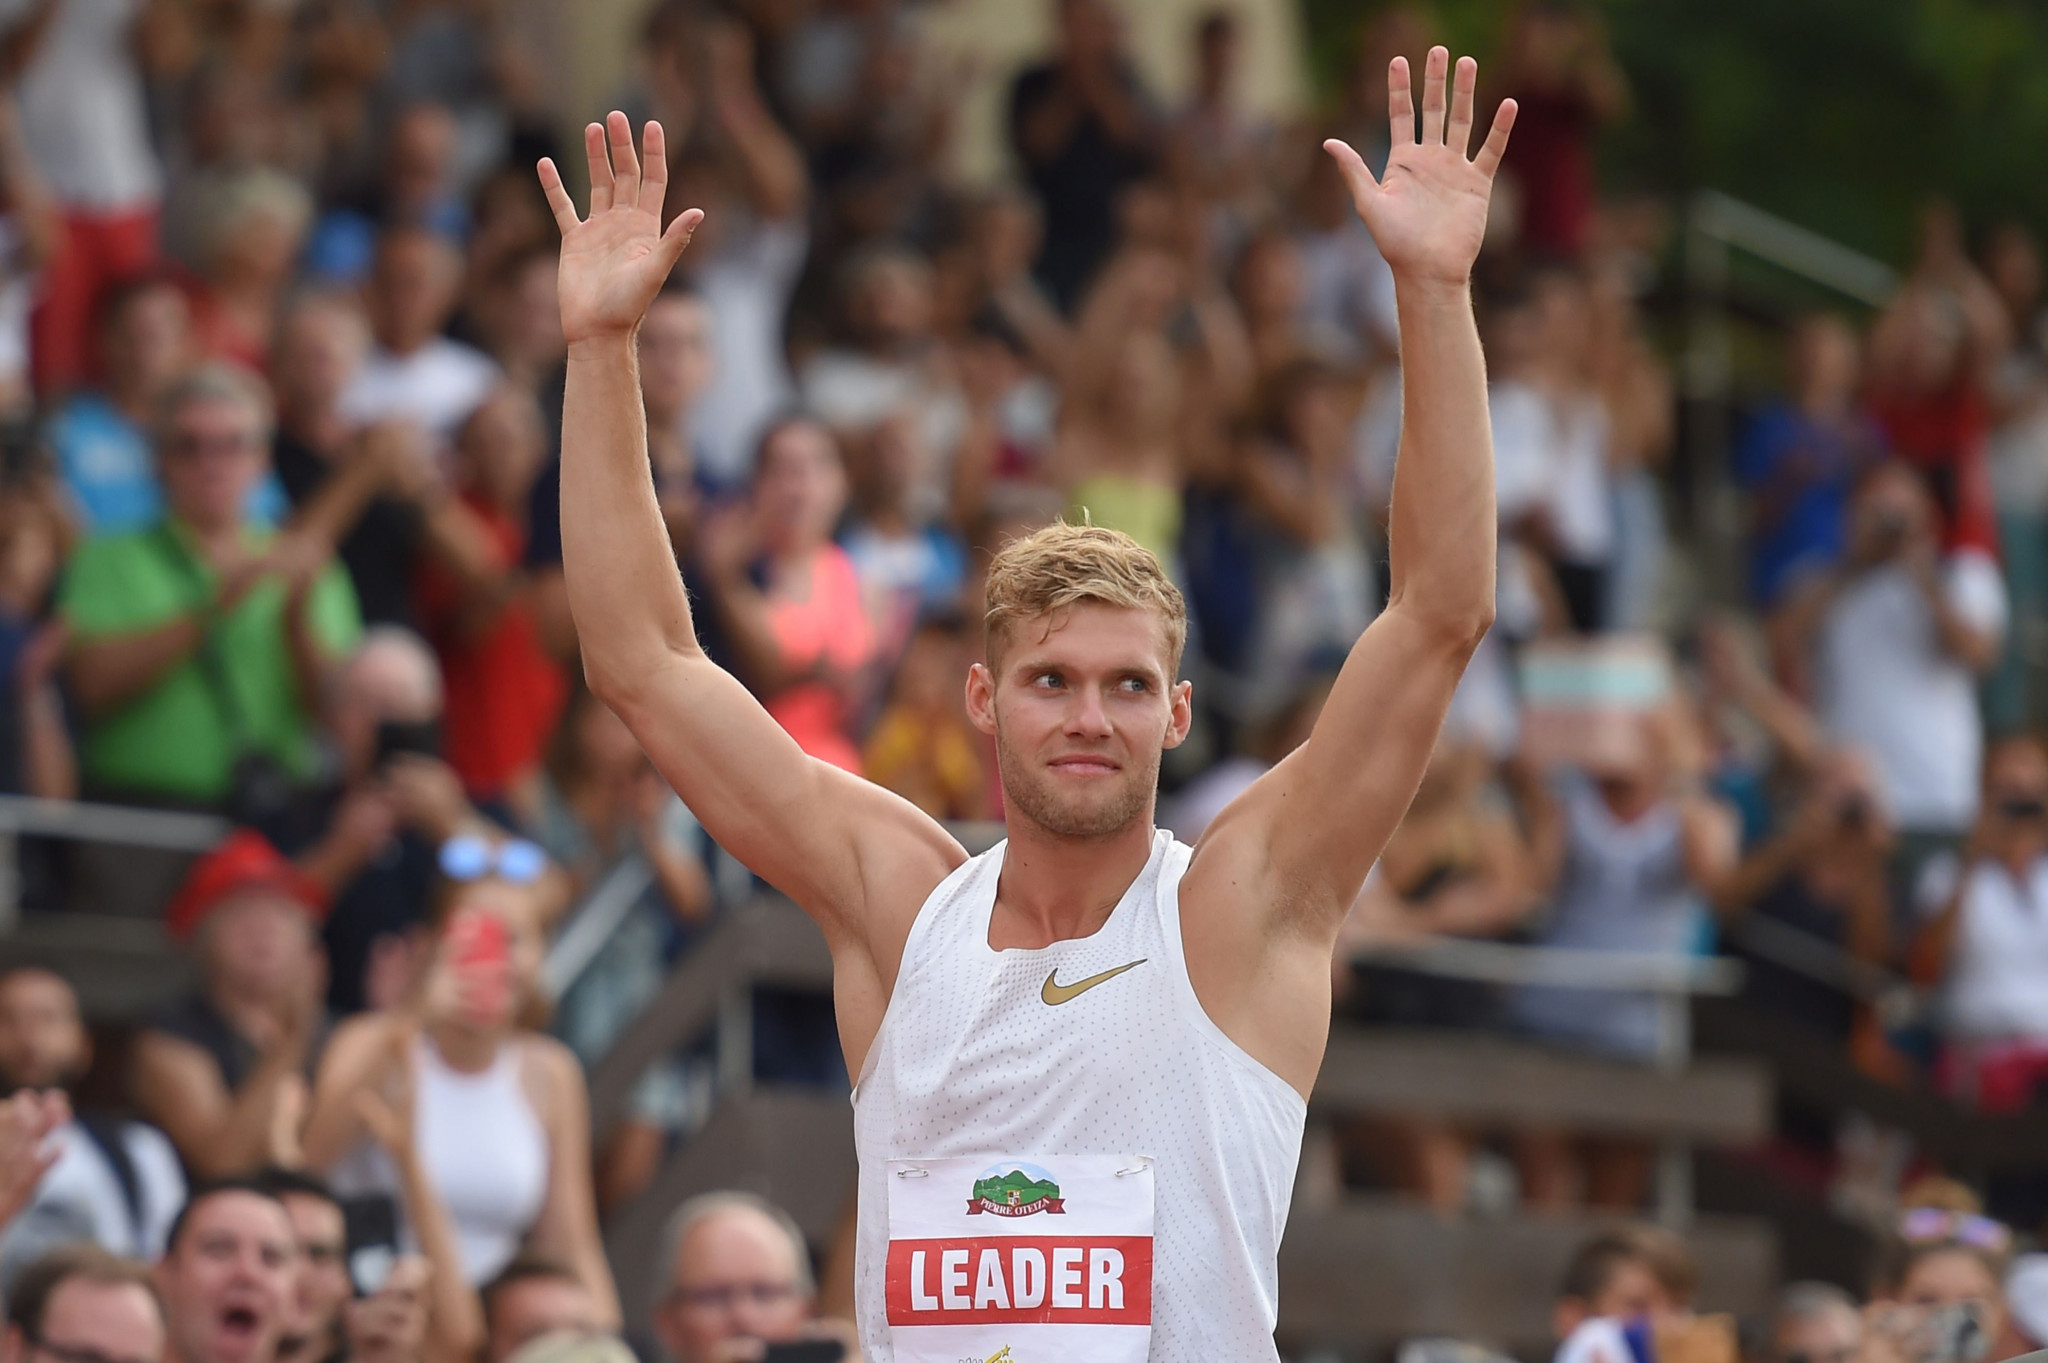 Kevin Mayer is the decathlon world record holder ©Getty Images